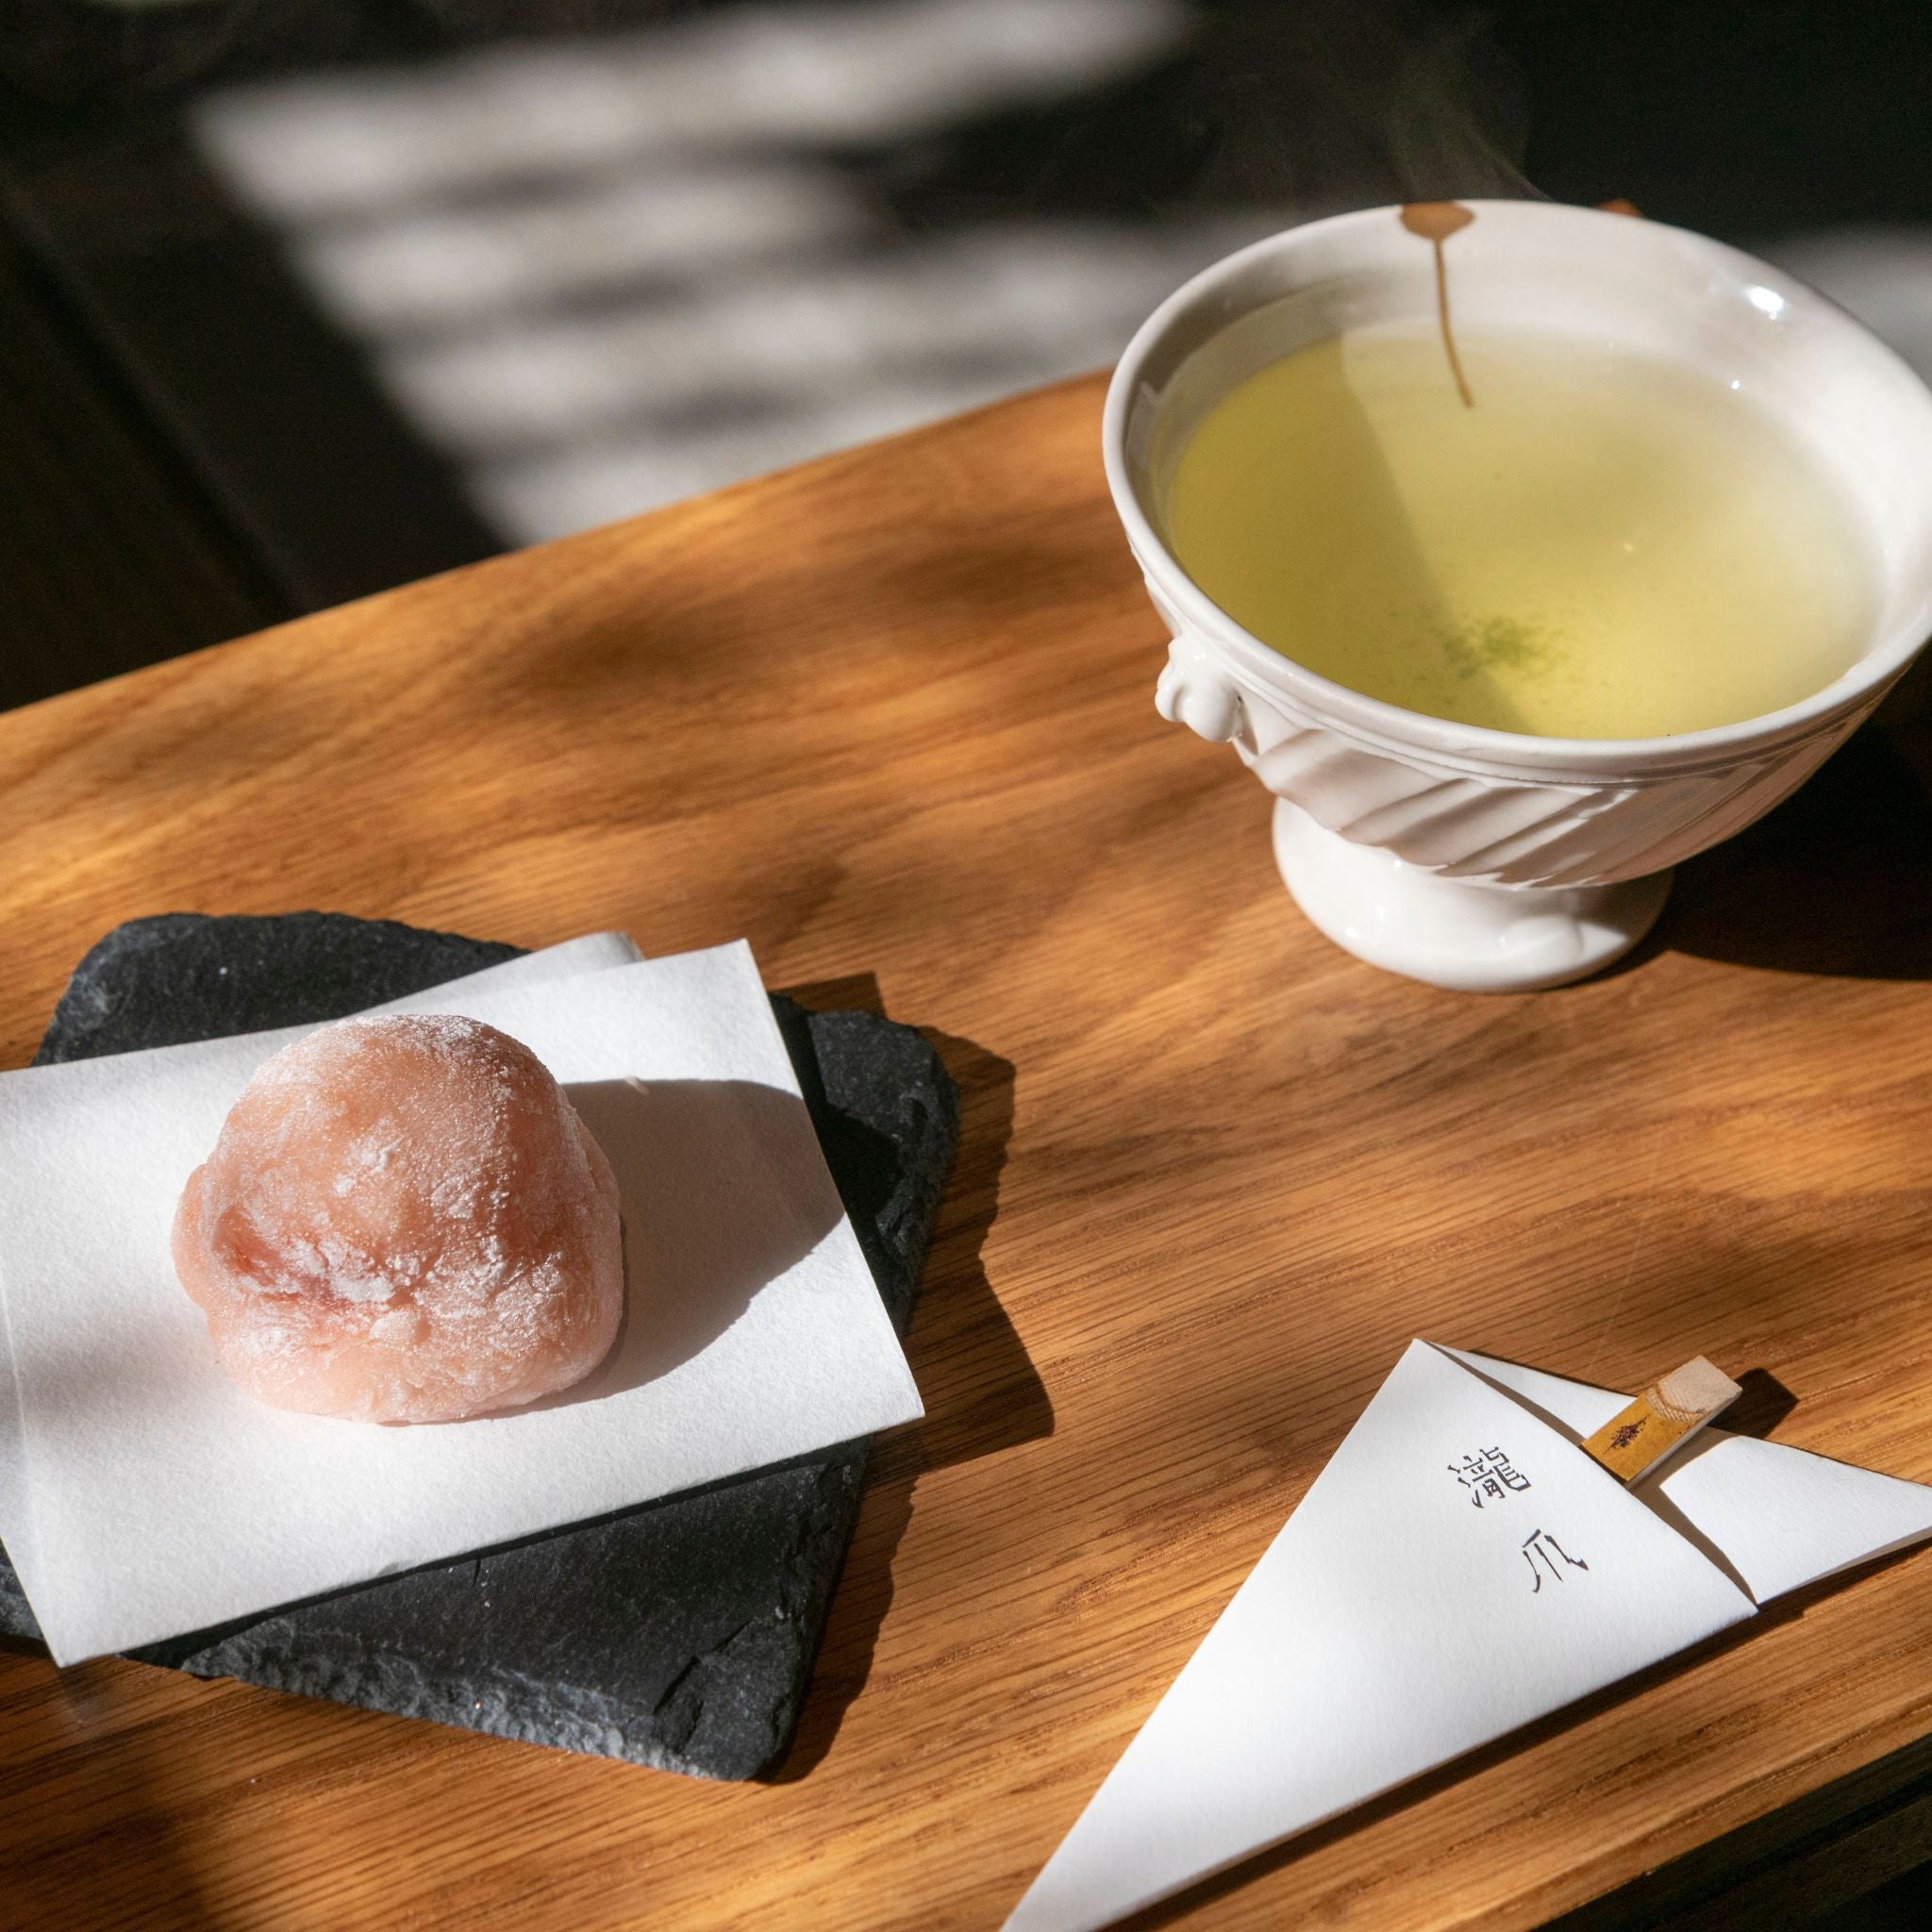 【Balancing Tea -Session in Japanese- 】 Three kinds of tea served with seasonal sweets